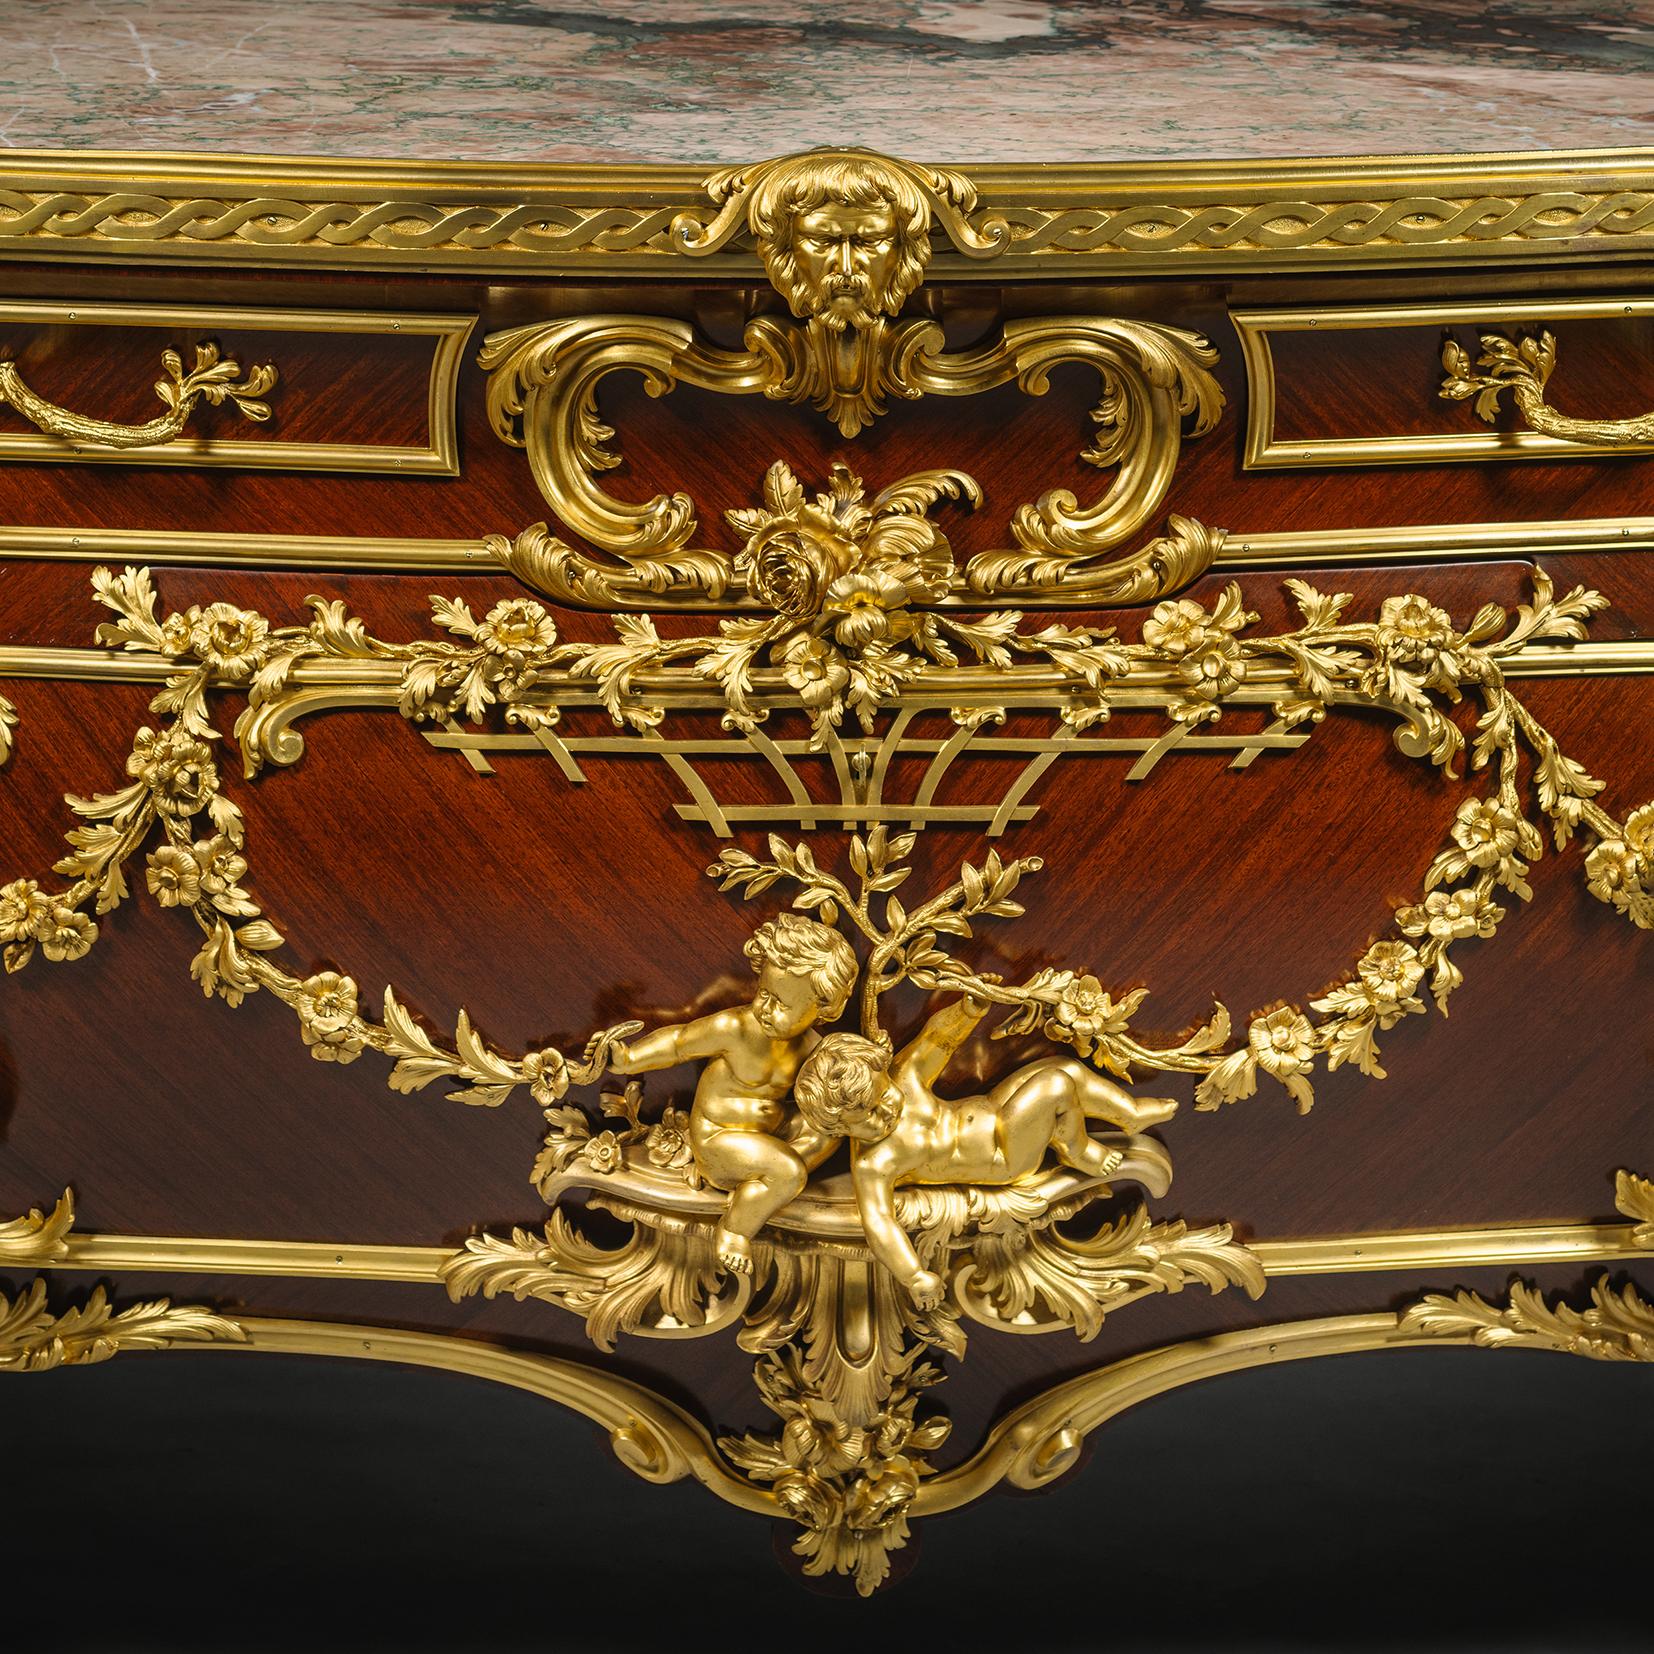 19th Century A Magnificent Rococo Style Commode After Johann Melchoir Kambli For Sale